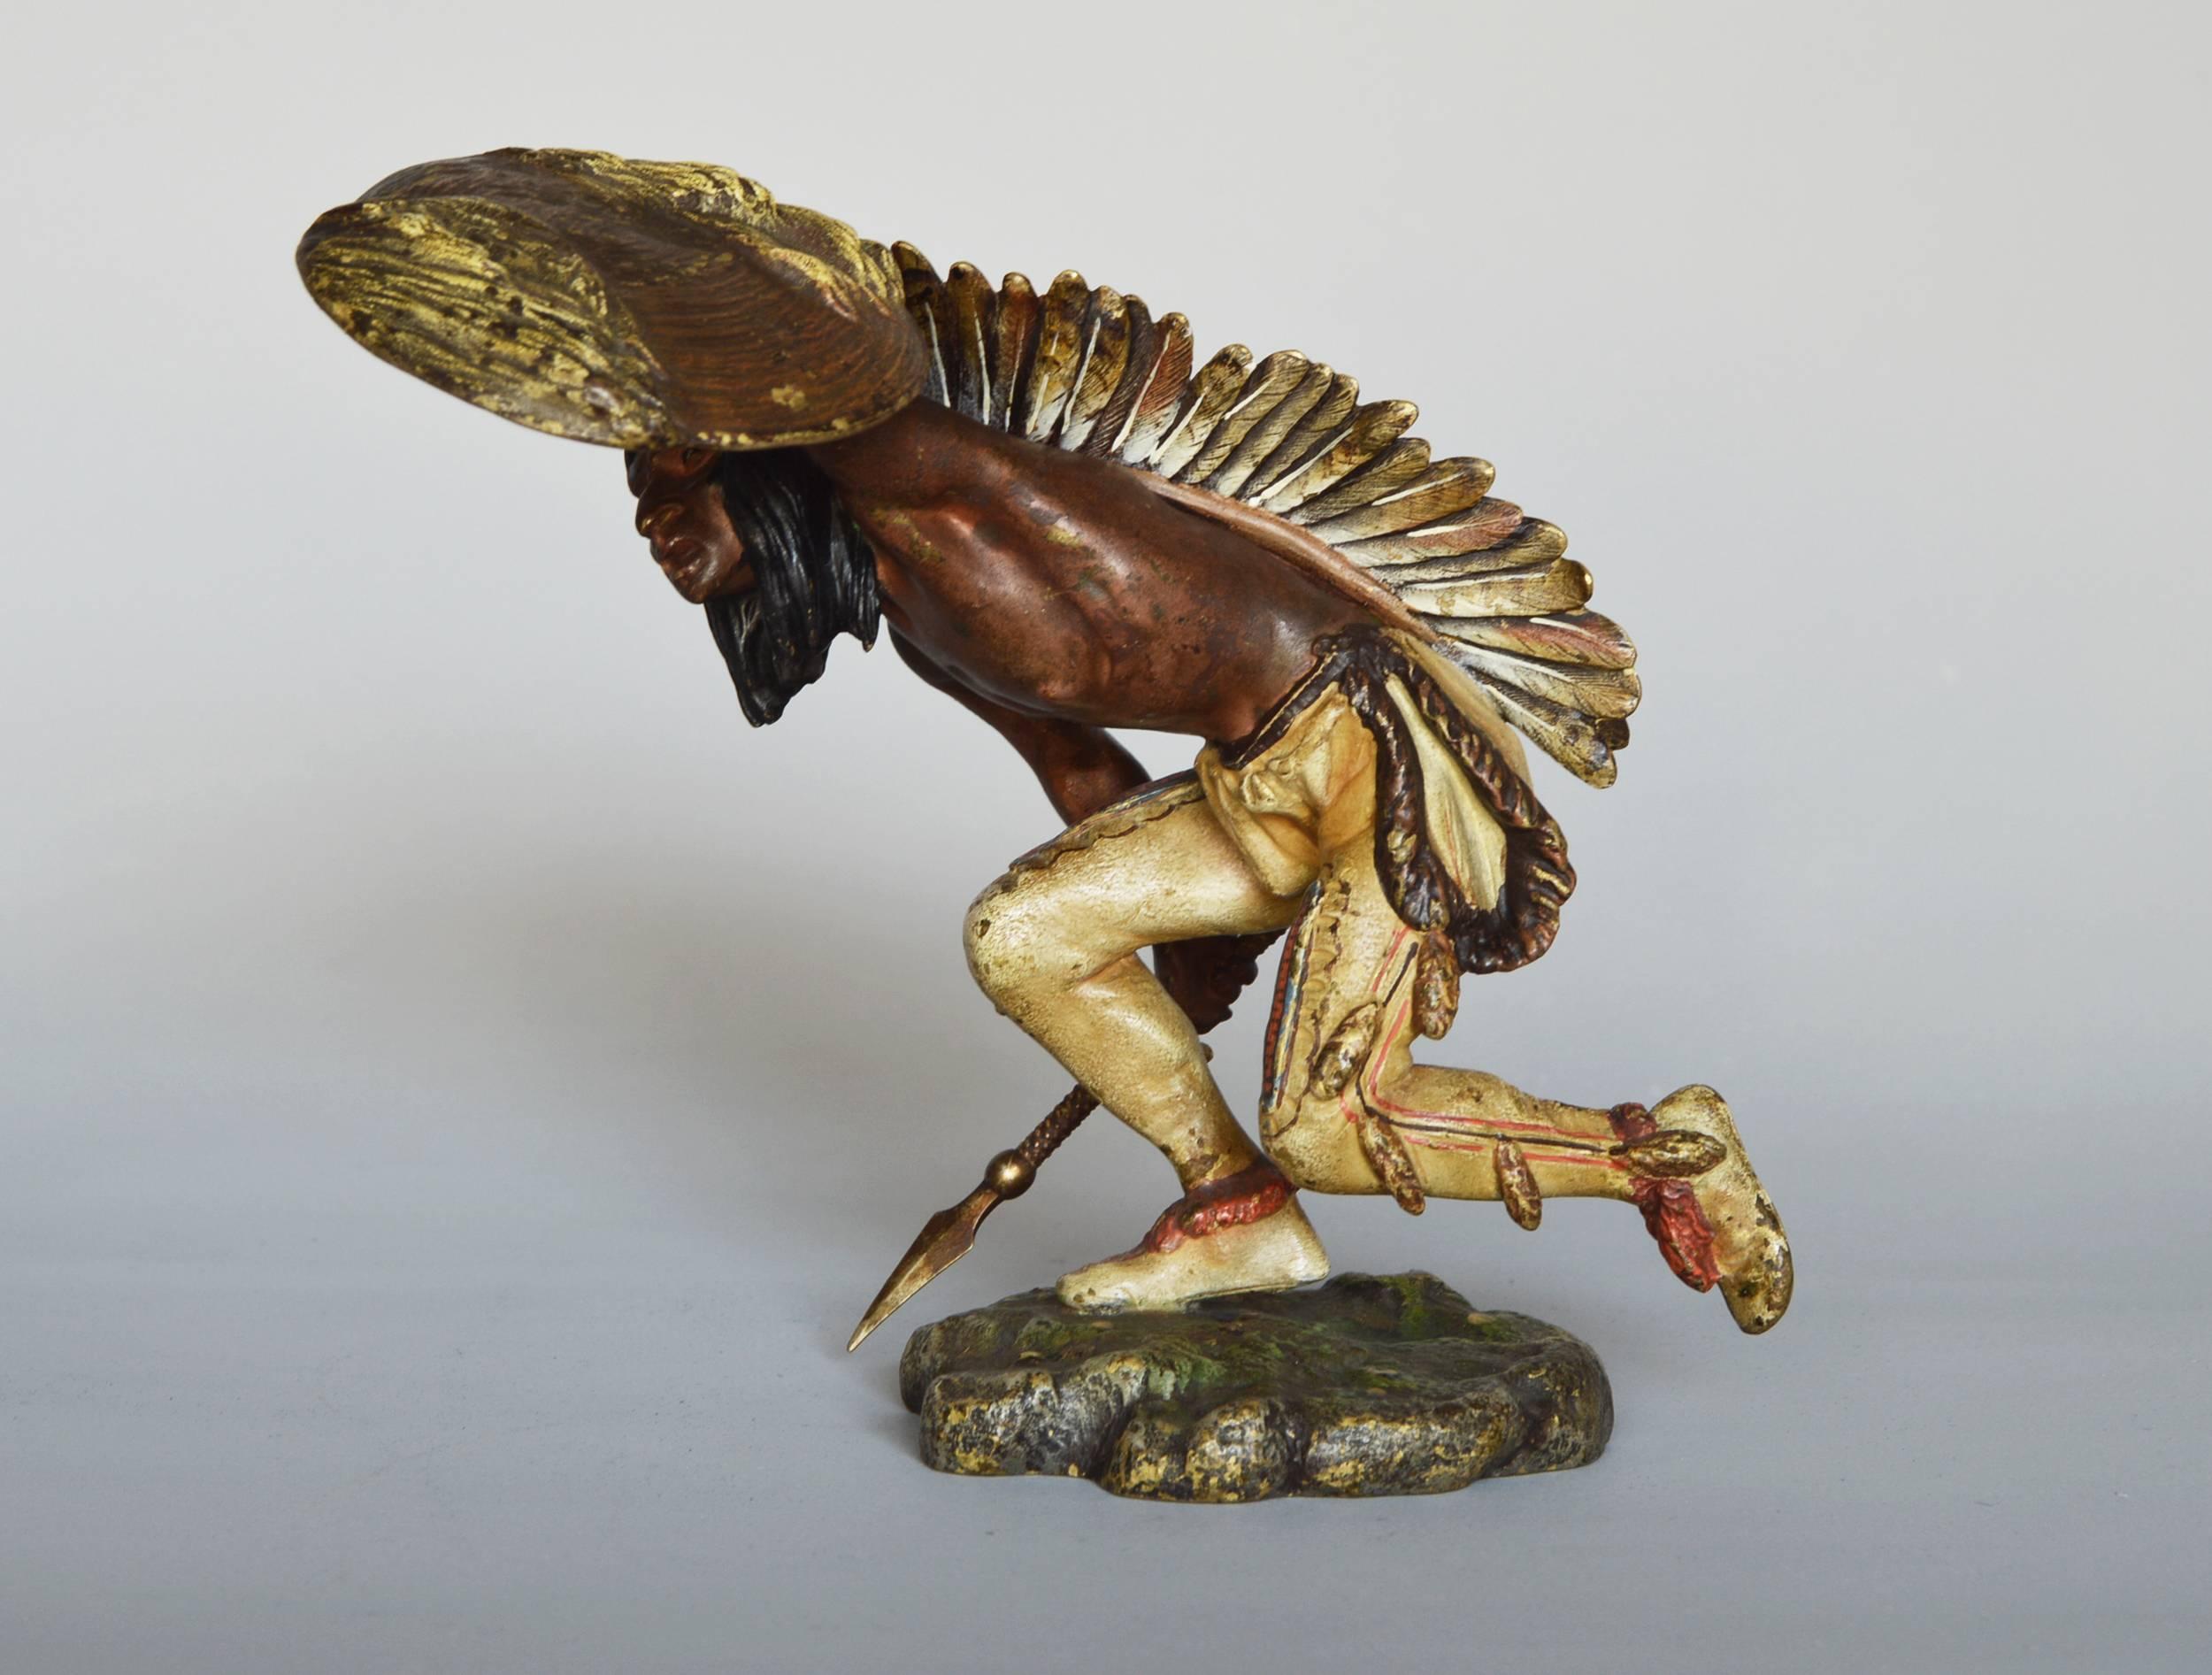 Franz Xavier Bergman
Austrian, (1861-1936)
Native American Indian Crouching
Bronze, cold painted, signed 'B' in a vase, numbered and stamped 'GESCHUTZT'
Height: 4¾ inches
Width: 4 inches
Depth: 5¼ inches

Franz Xavier Bergman was the son of